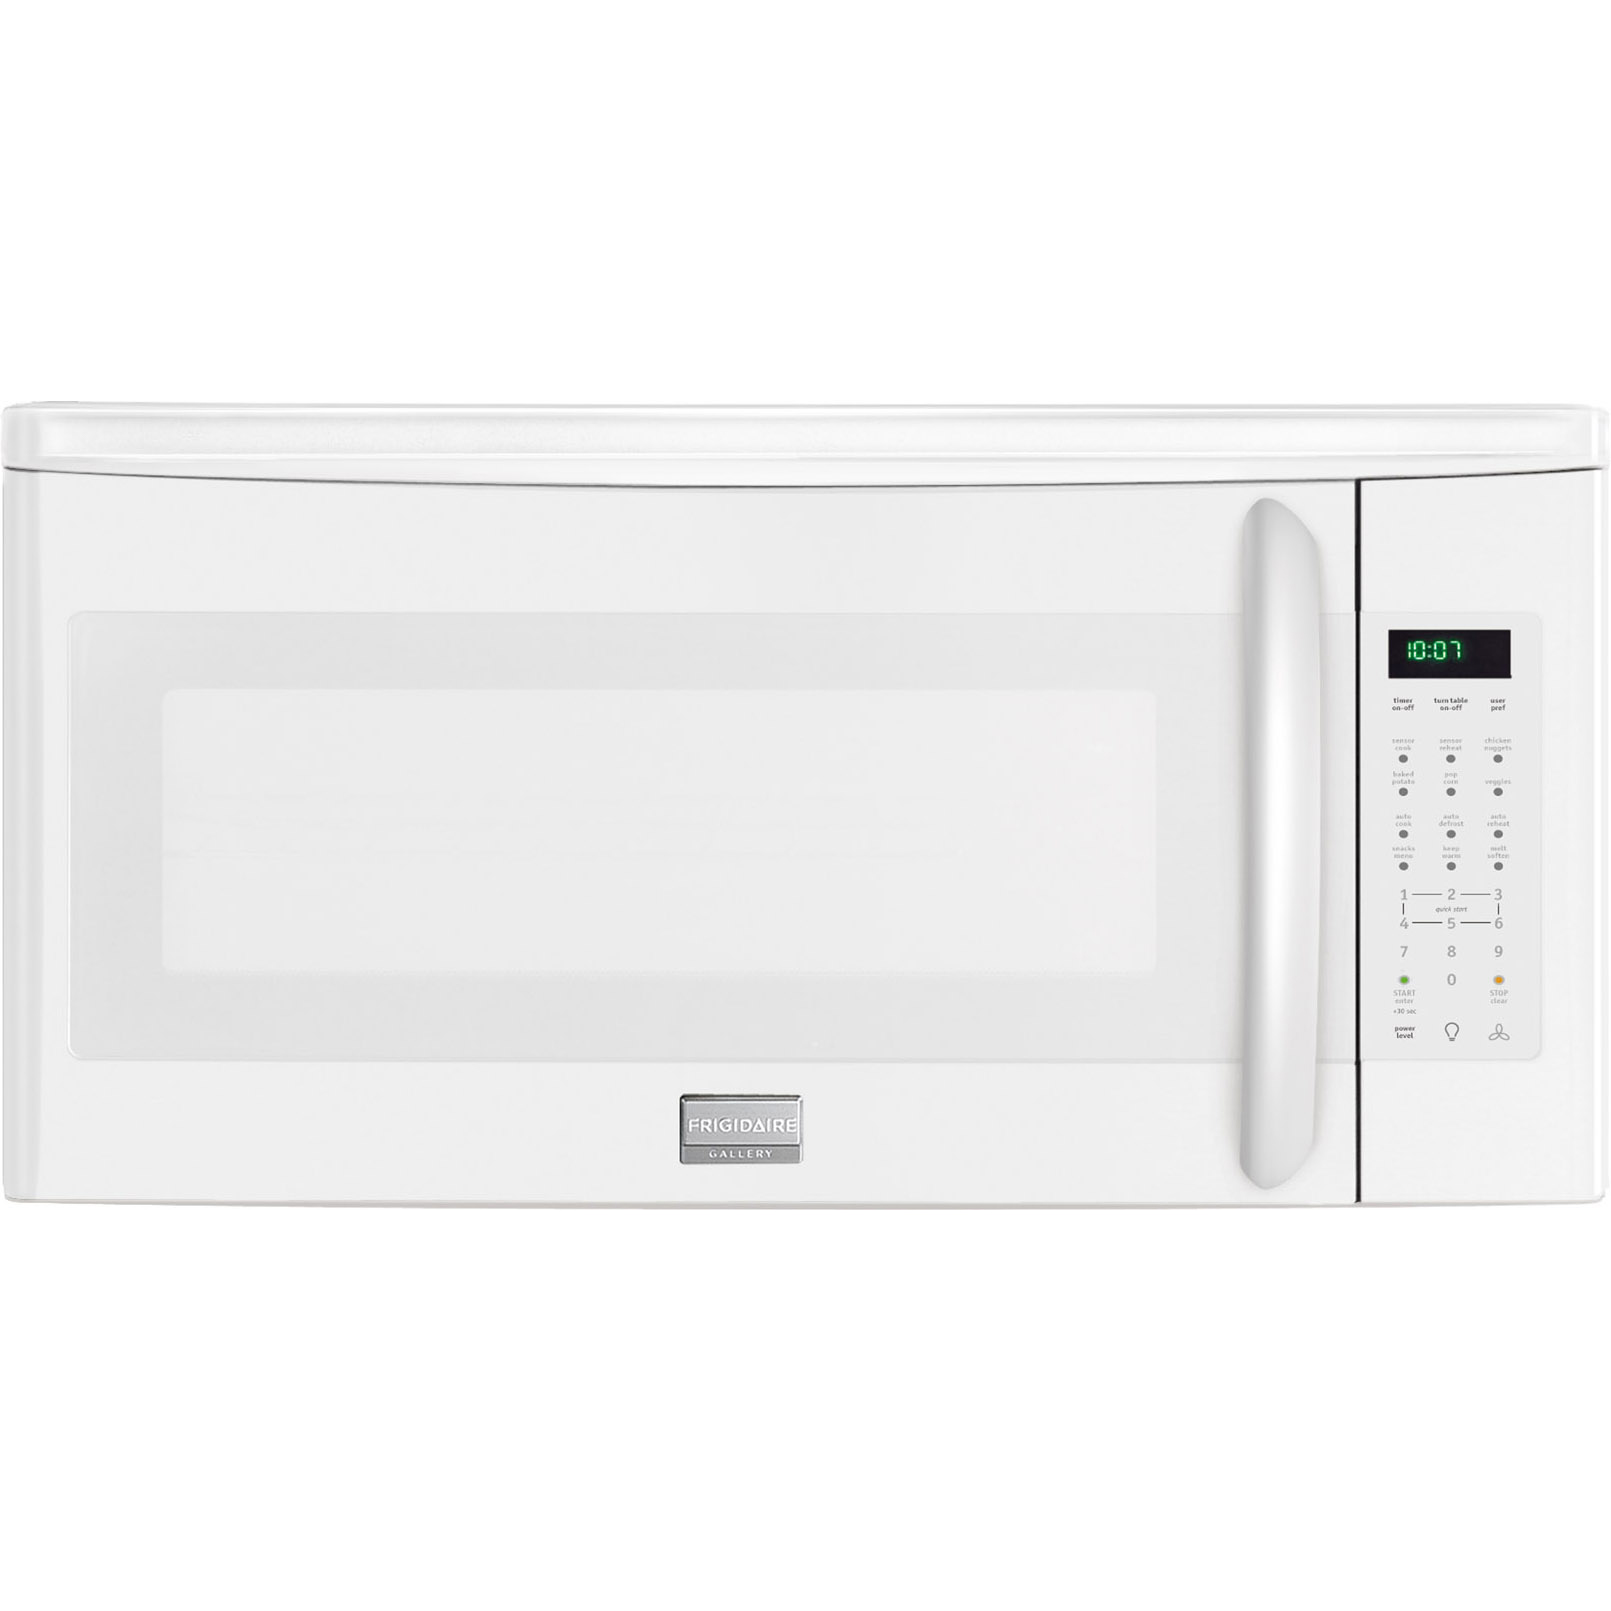 Frigidaire FGMV205KW Gallery 2.0 cu. ft. Over-the-Range Microwave - White